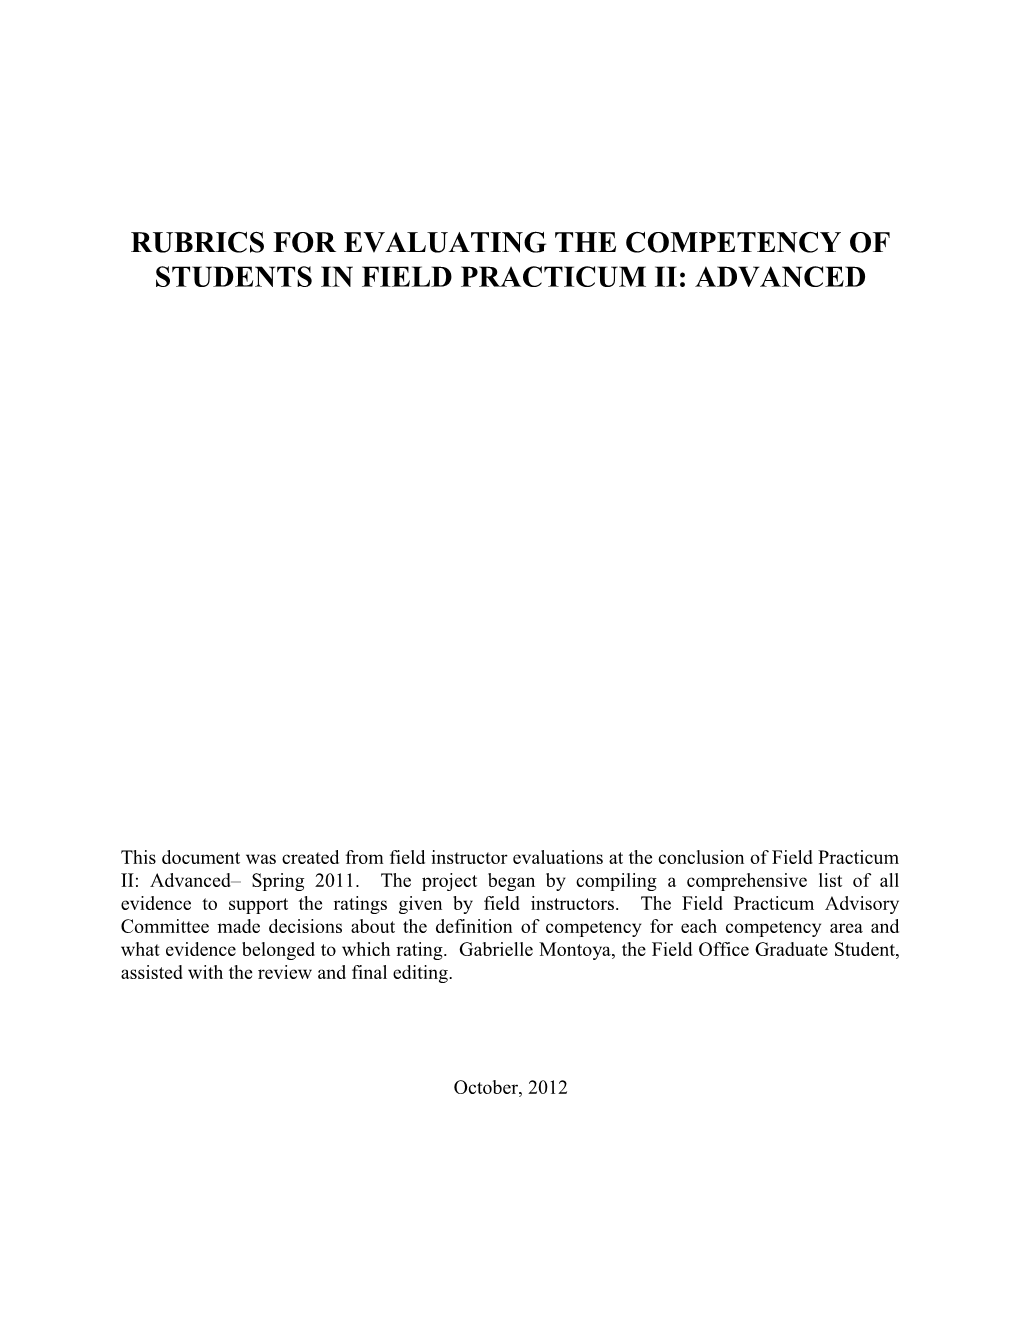 Rubrics for Evaluating the Competency of Students in Field Practicum Ii: Advanced